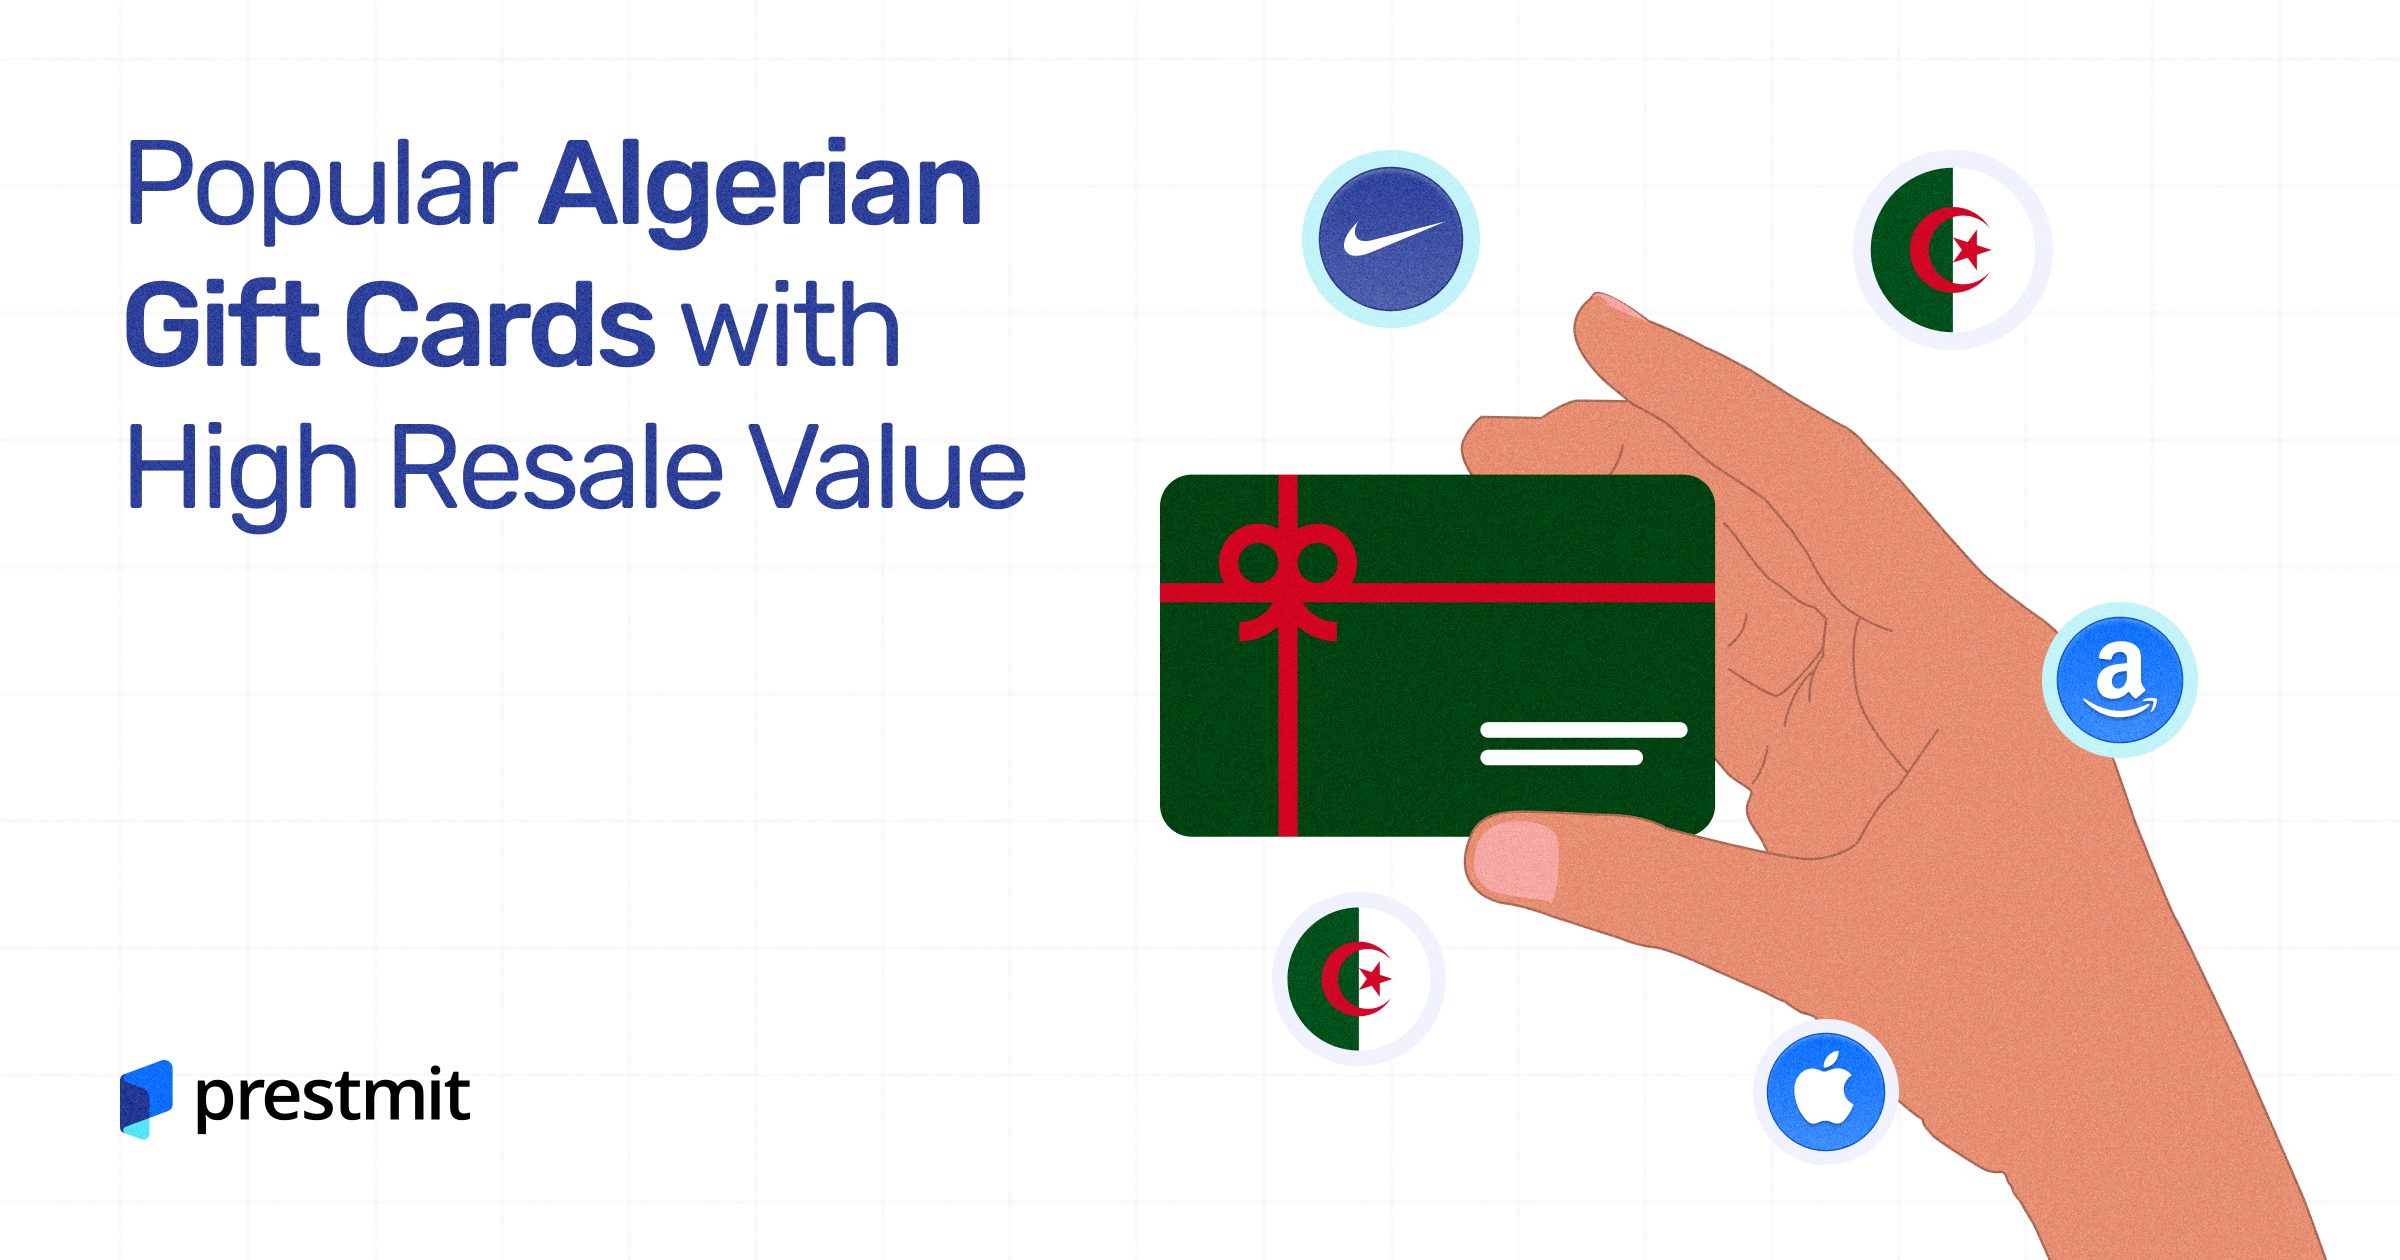 7 Popular Gift Cards in Algeria With High Resale Value